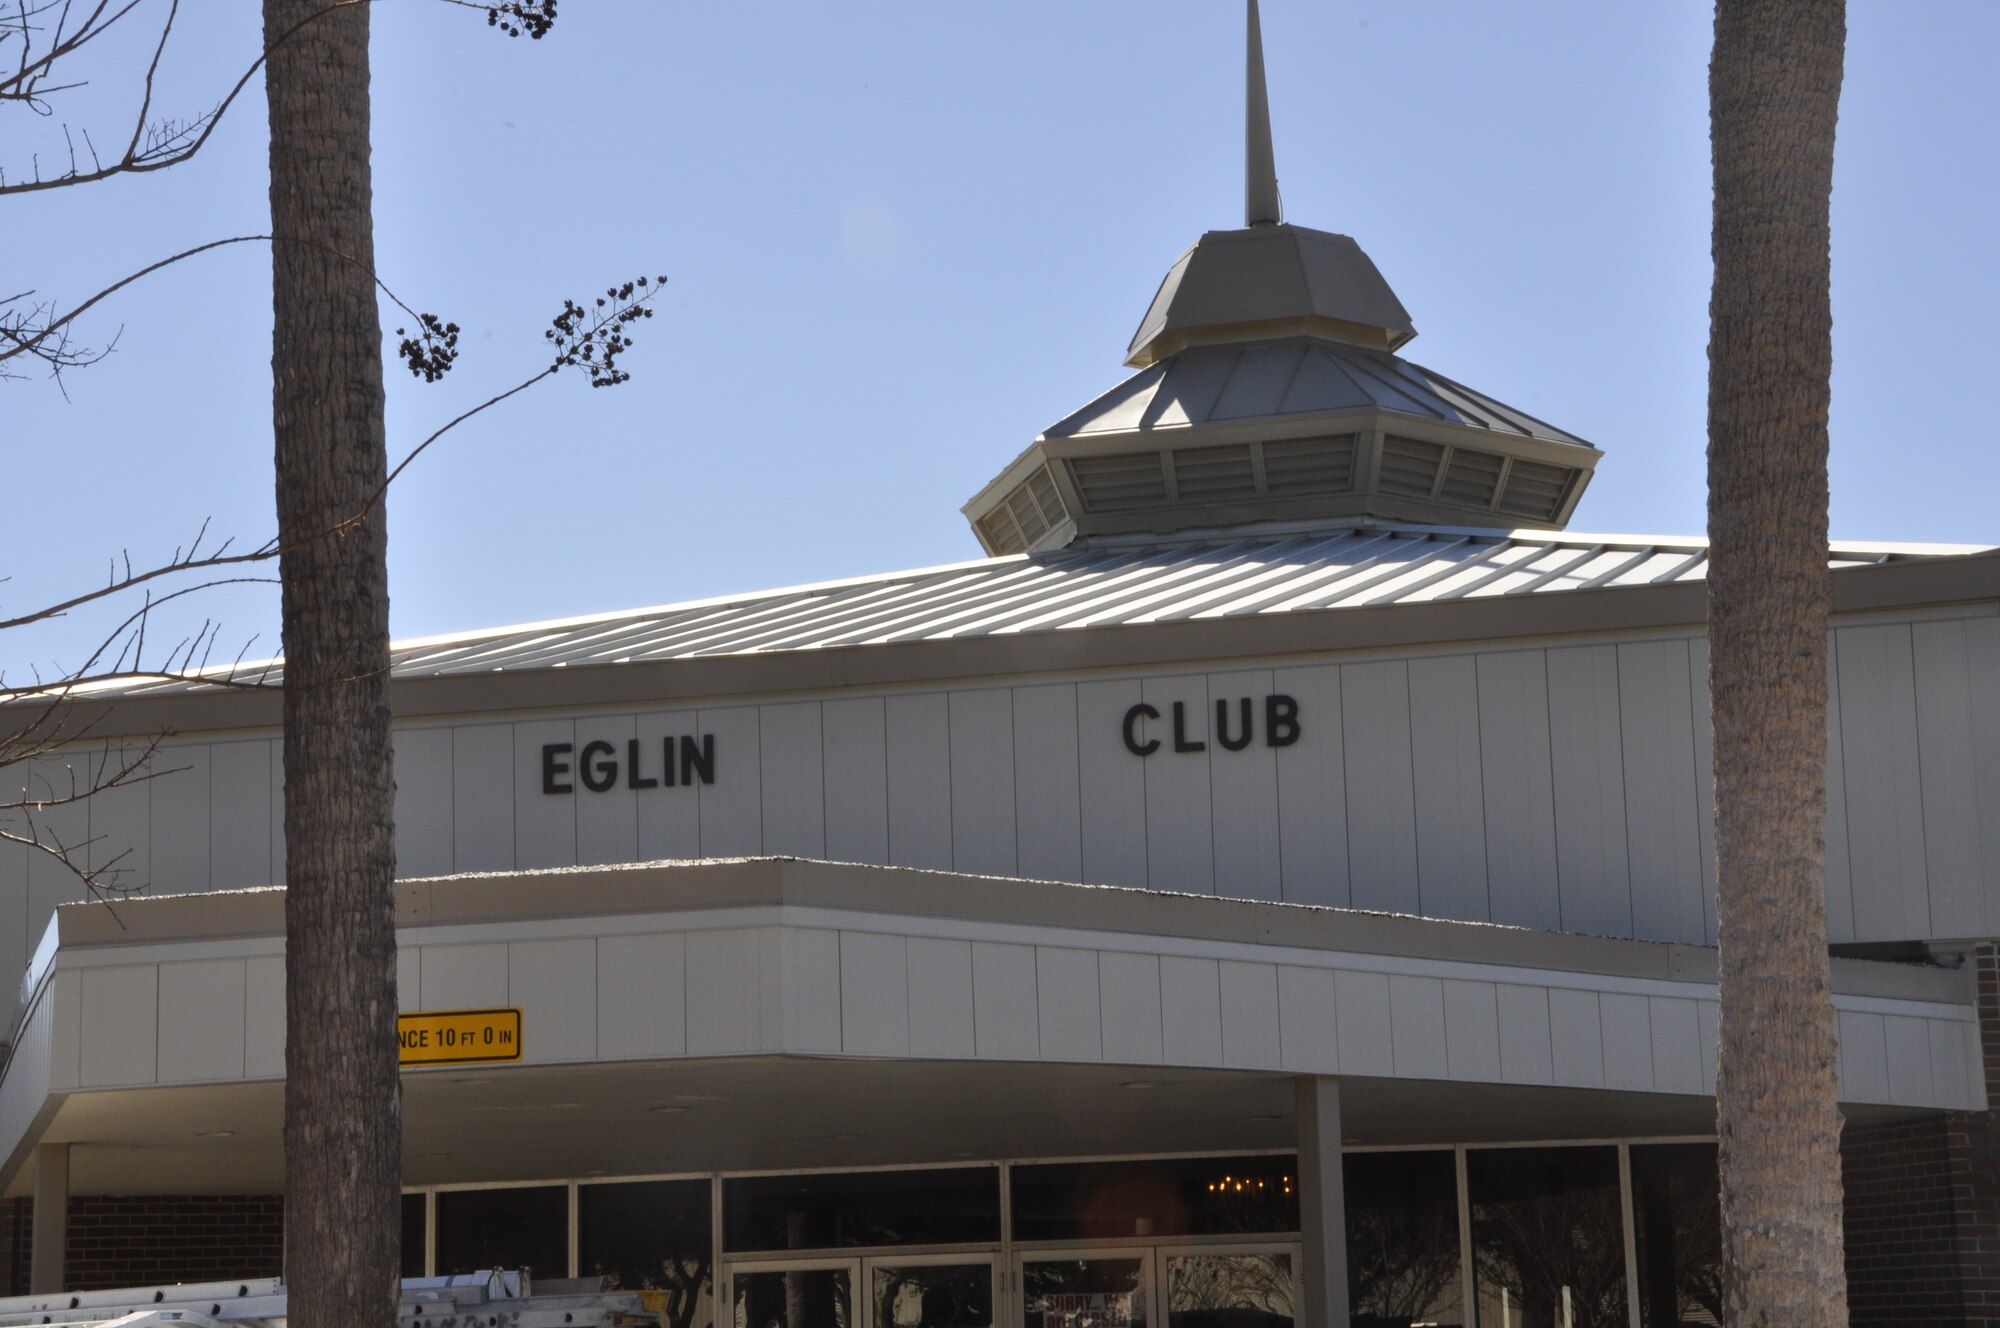 The Eglin Club opens its doors after seven months of renovations. The club’s grand opening is scheduled for March 4. (USAF photo/Lois Walsh)